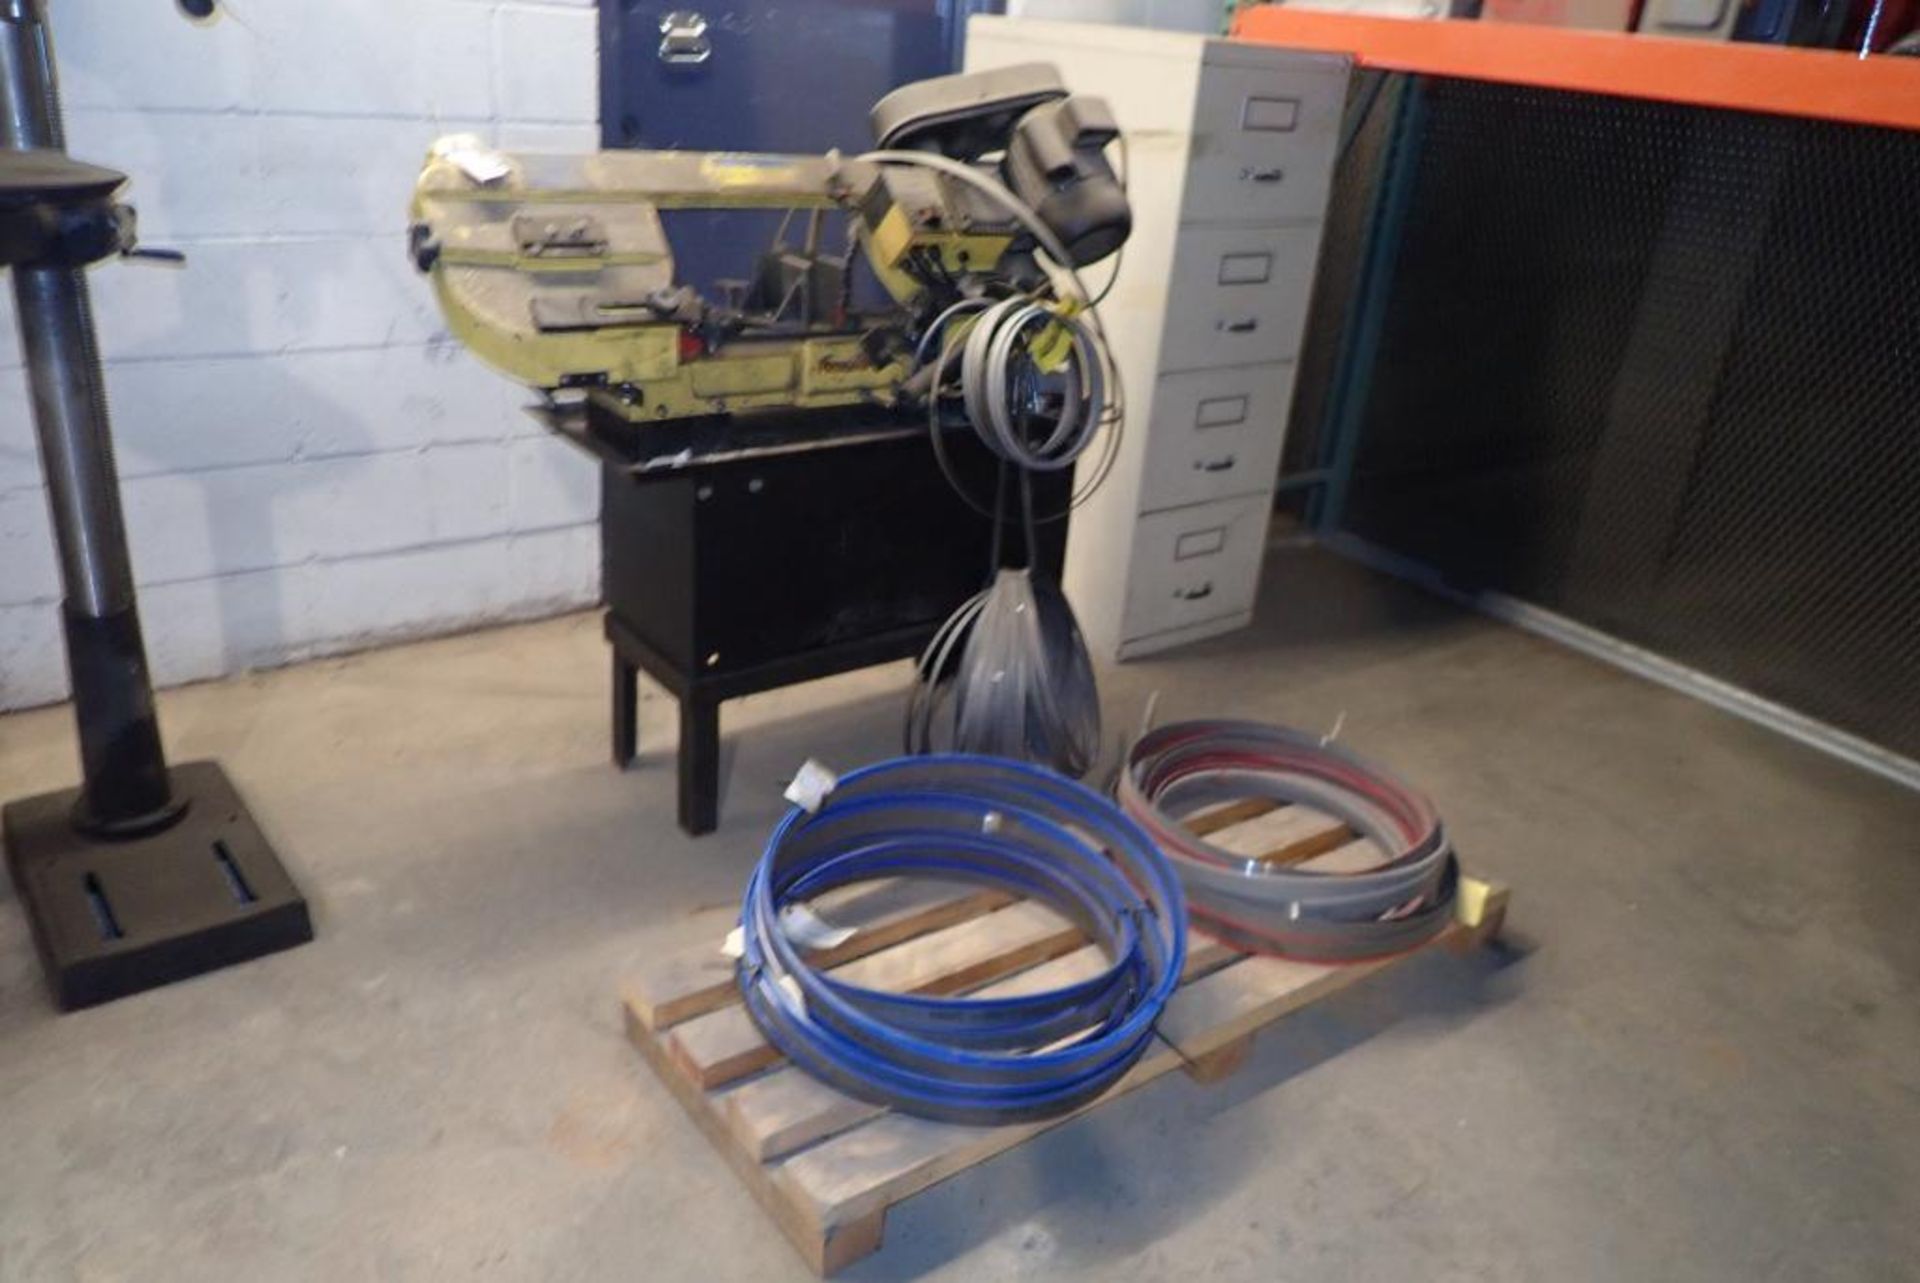 PowerFist 7" Metal Cutting Bandsaw and Blades.